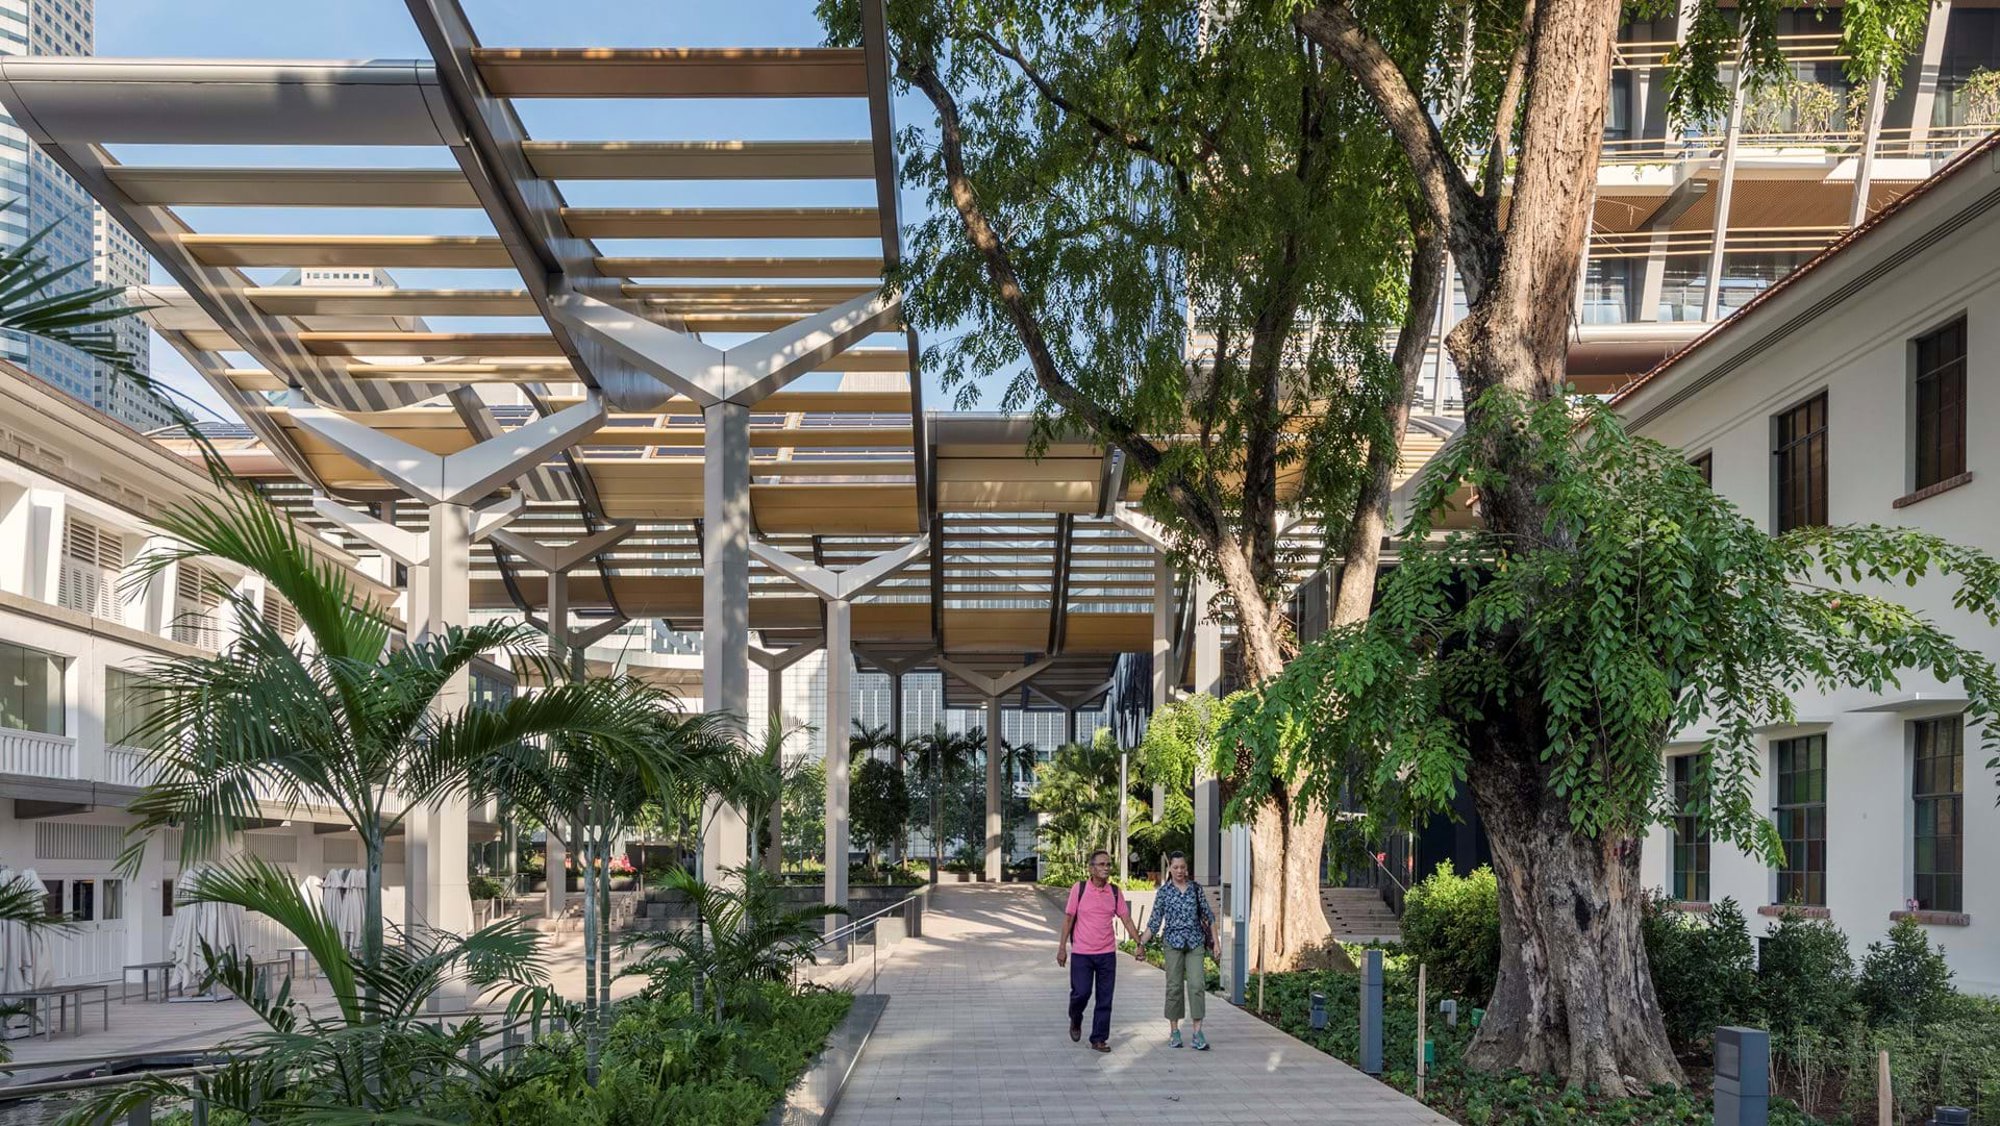 At South Beach in Singapore, an innovative covered walkway provides connections to nature as well as the comfort of cooling breezes on especially warm days. © Nigel Young / Foster + Partners 